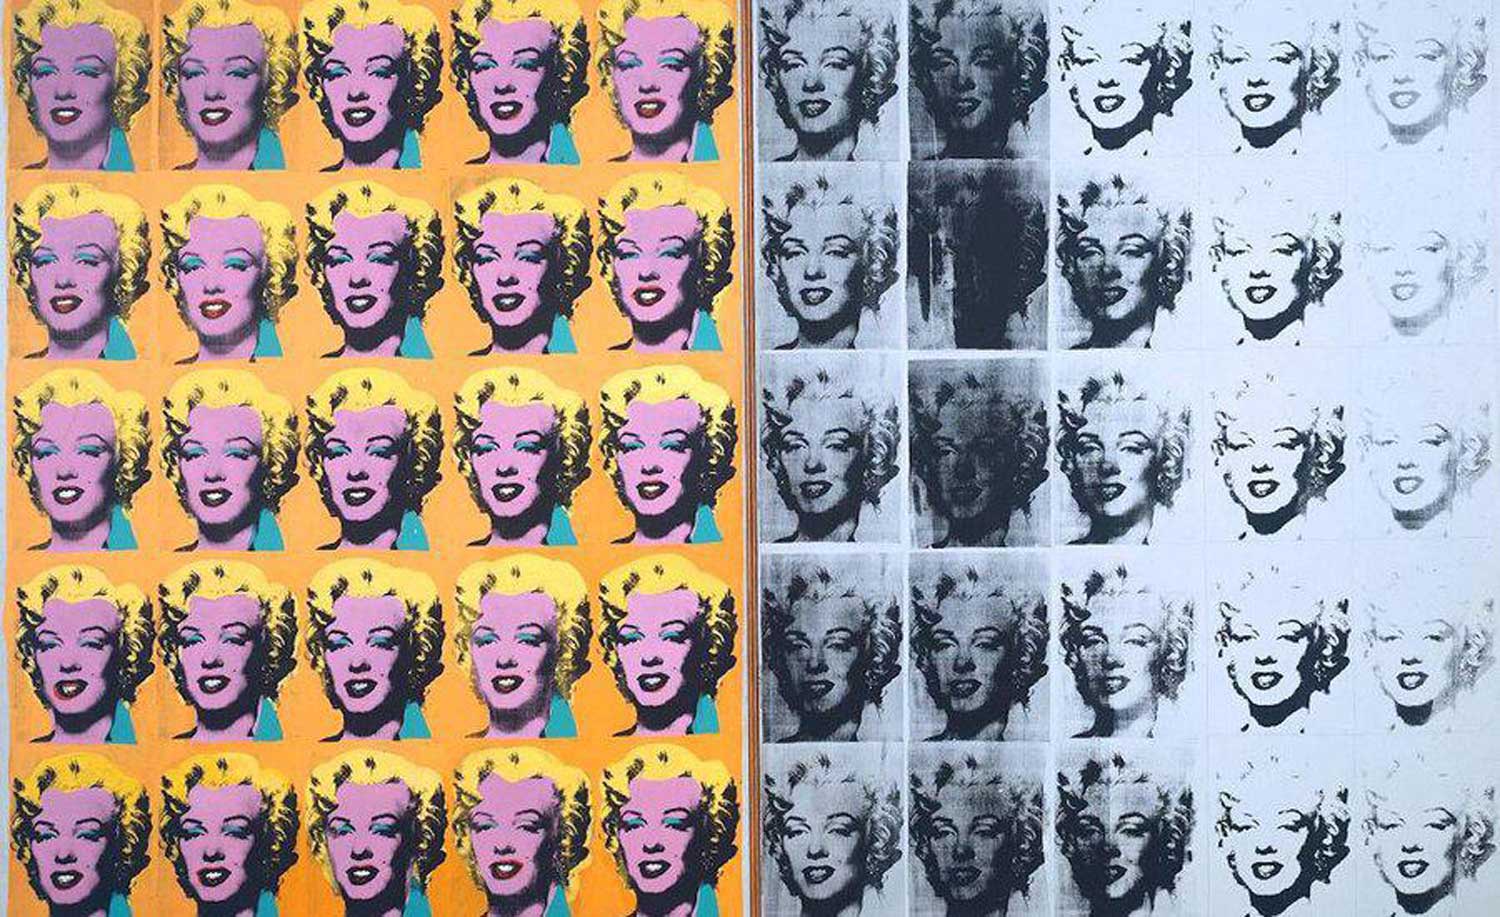 Marilyn Diptych by Andy Warhol, 1962 (image Artspace)